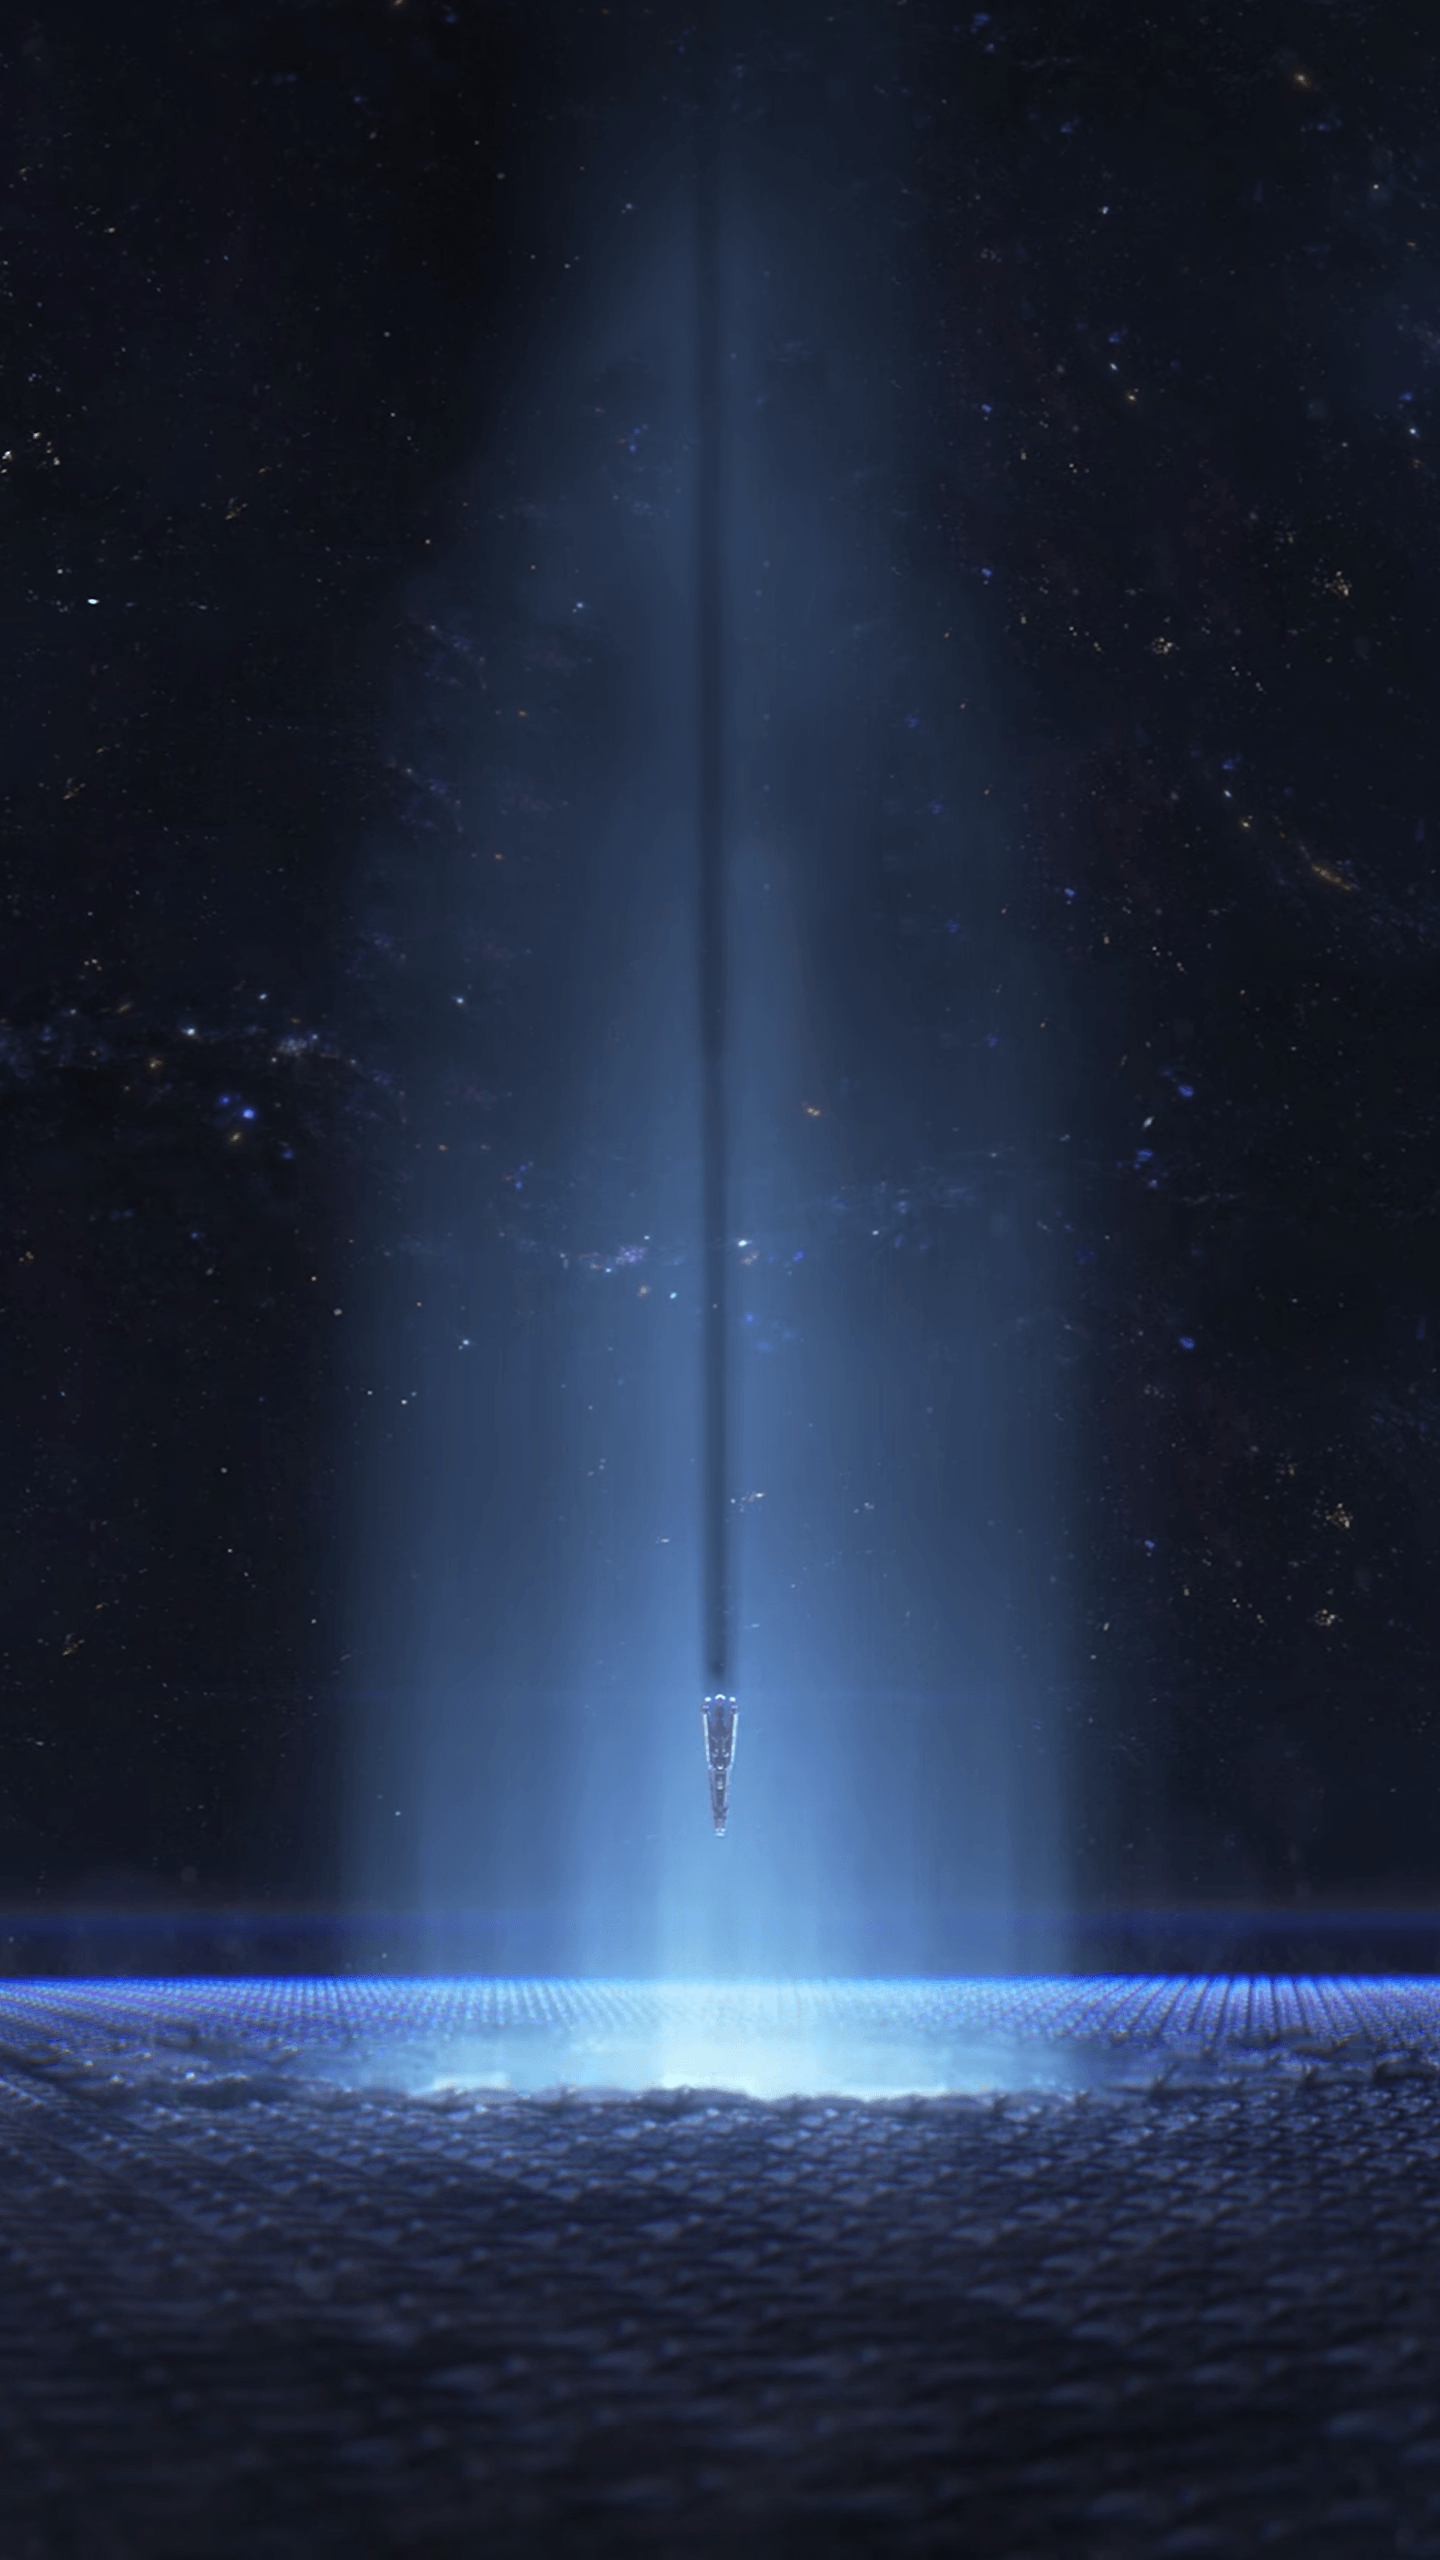 Mass Effect Andromeda mobile [1440x2560]. WALLPAPERS